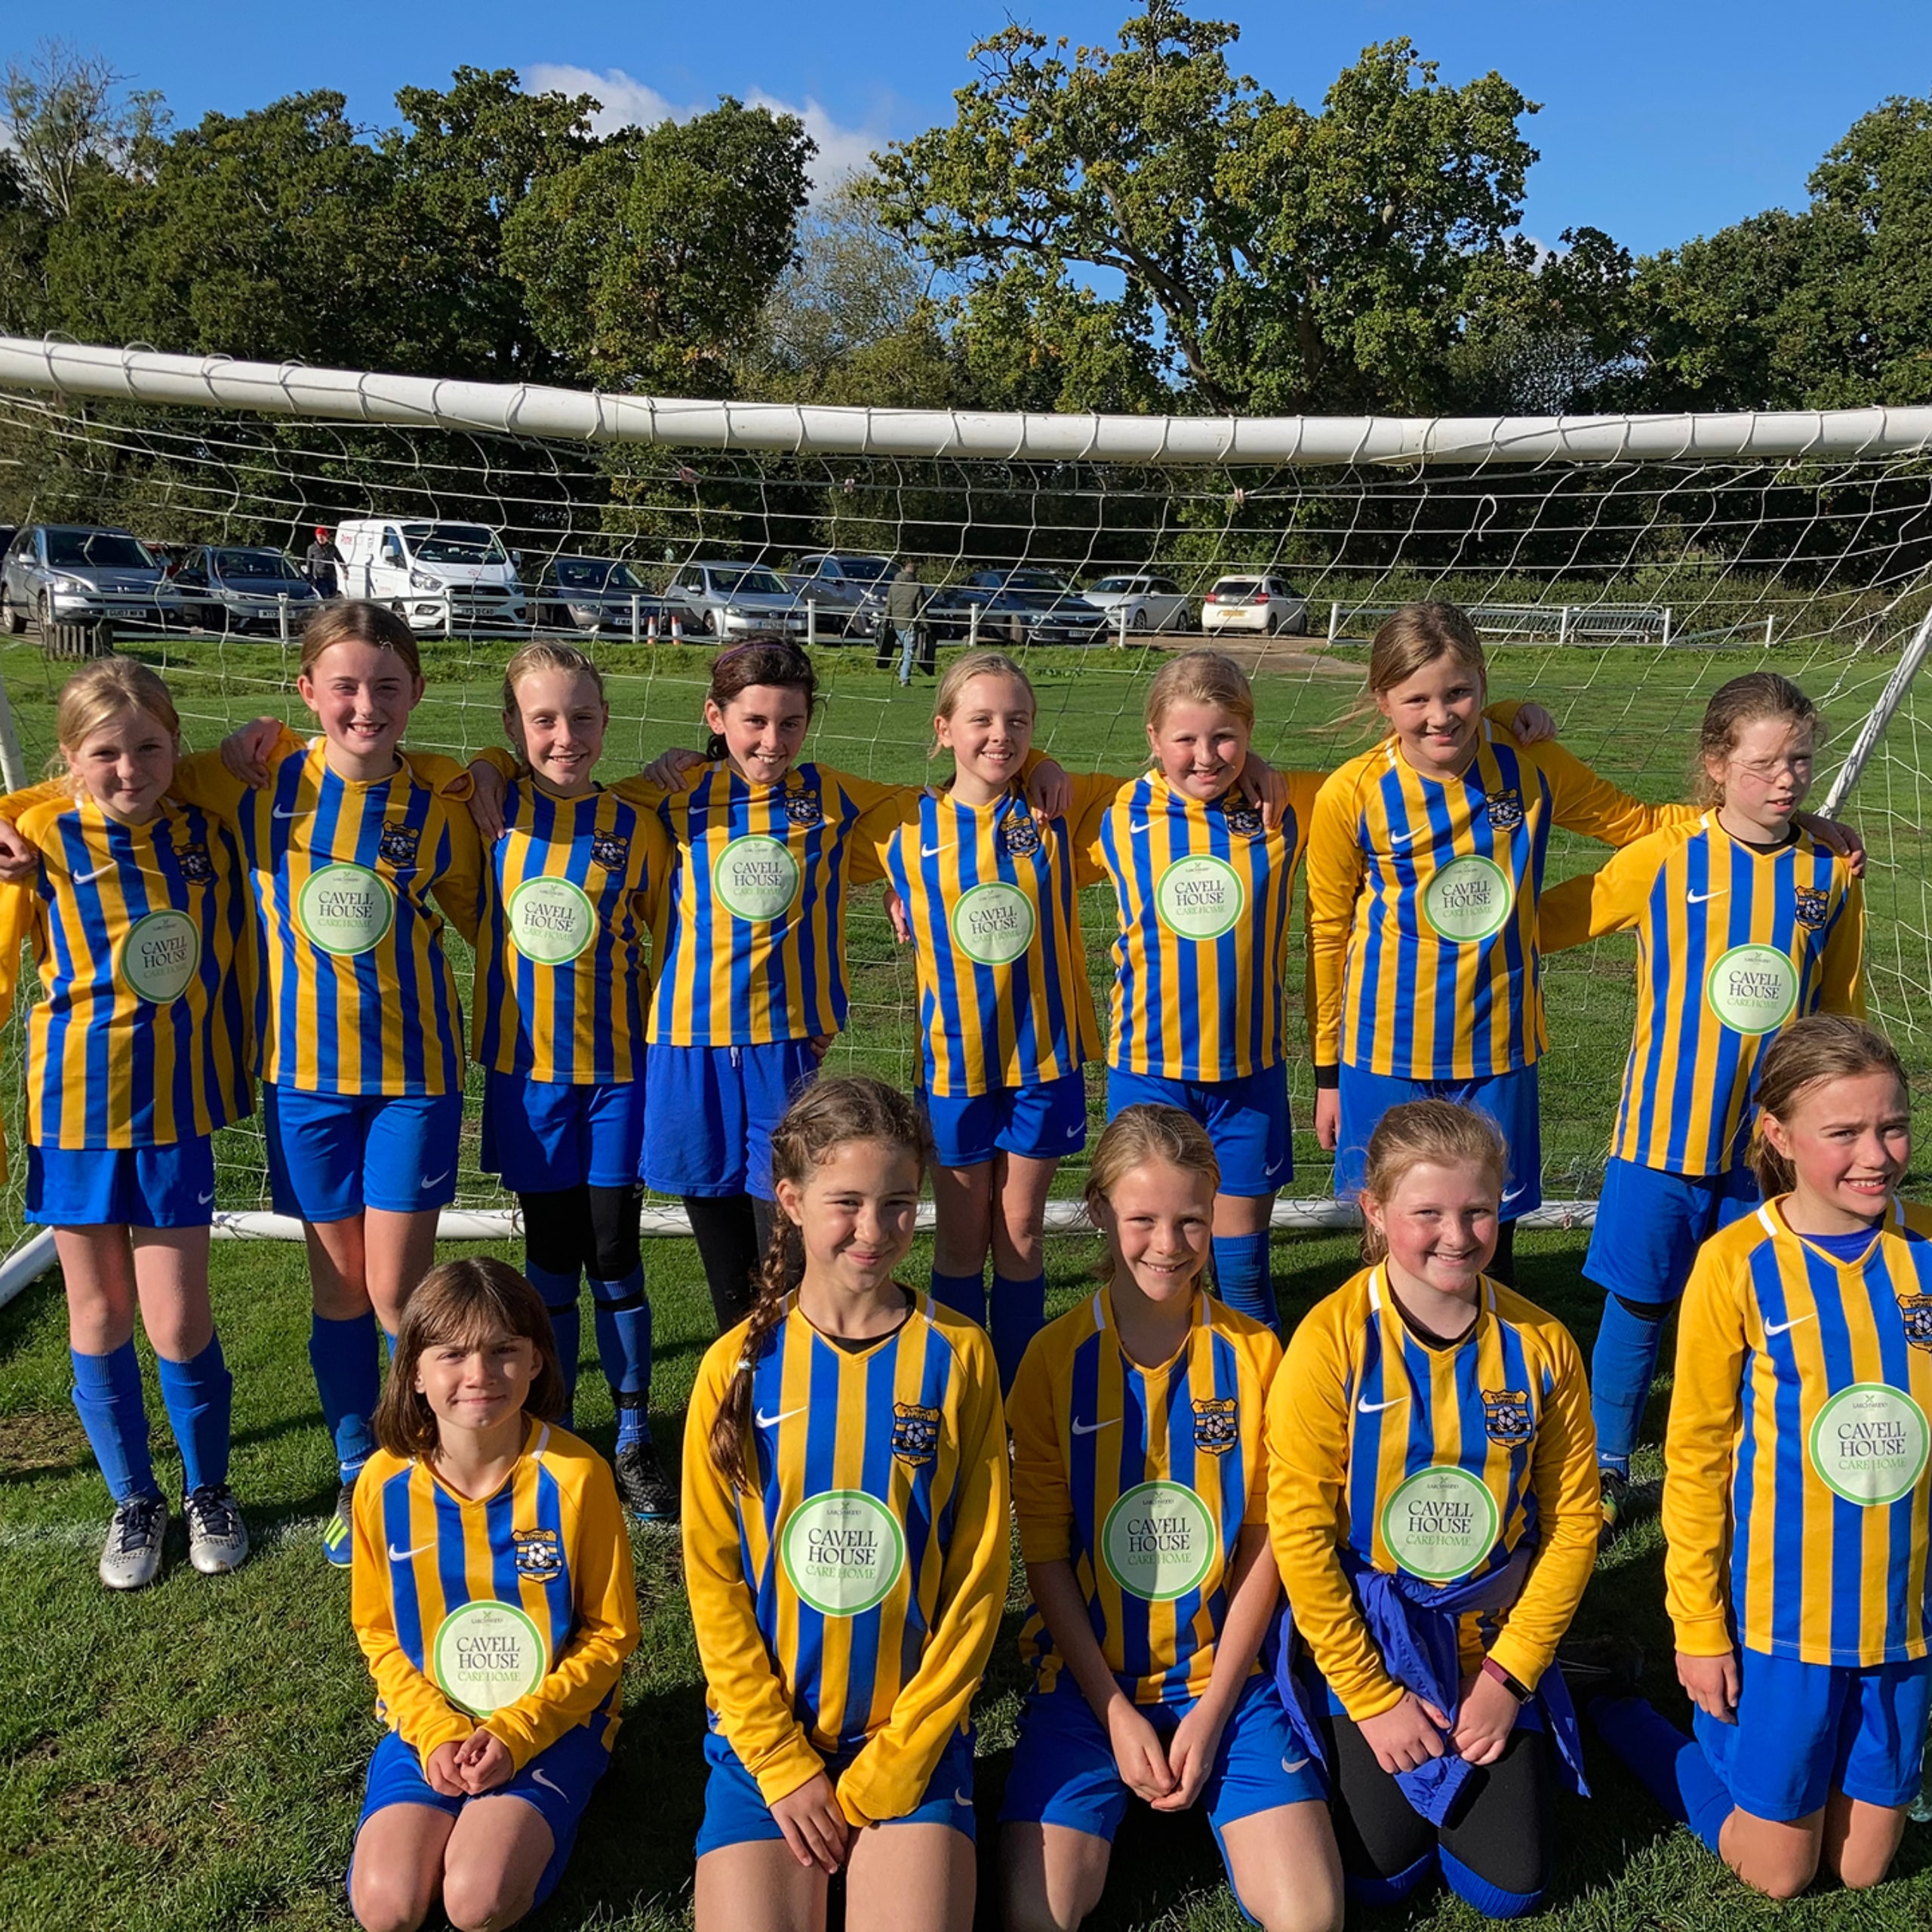 Southwick Rangers U11s girls’ team in their new kit sponsored by Cavell House Care Home.